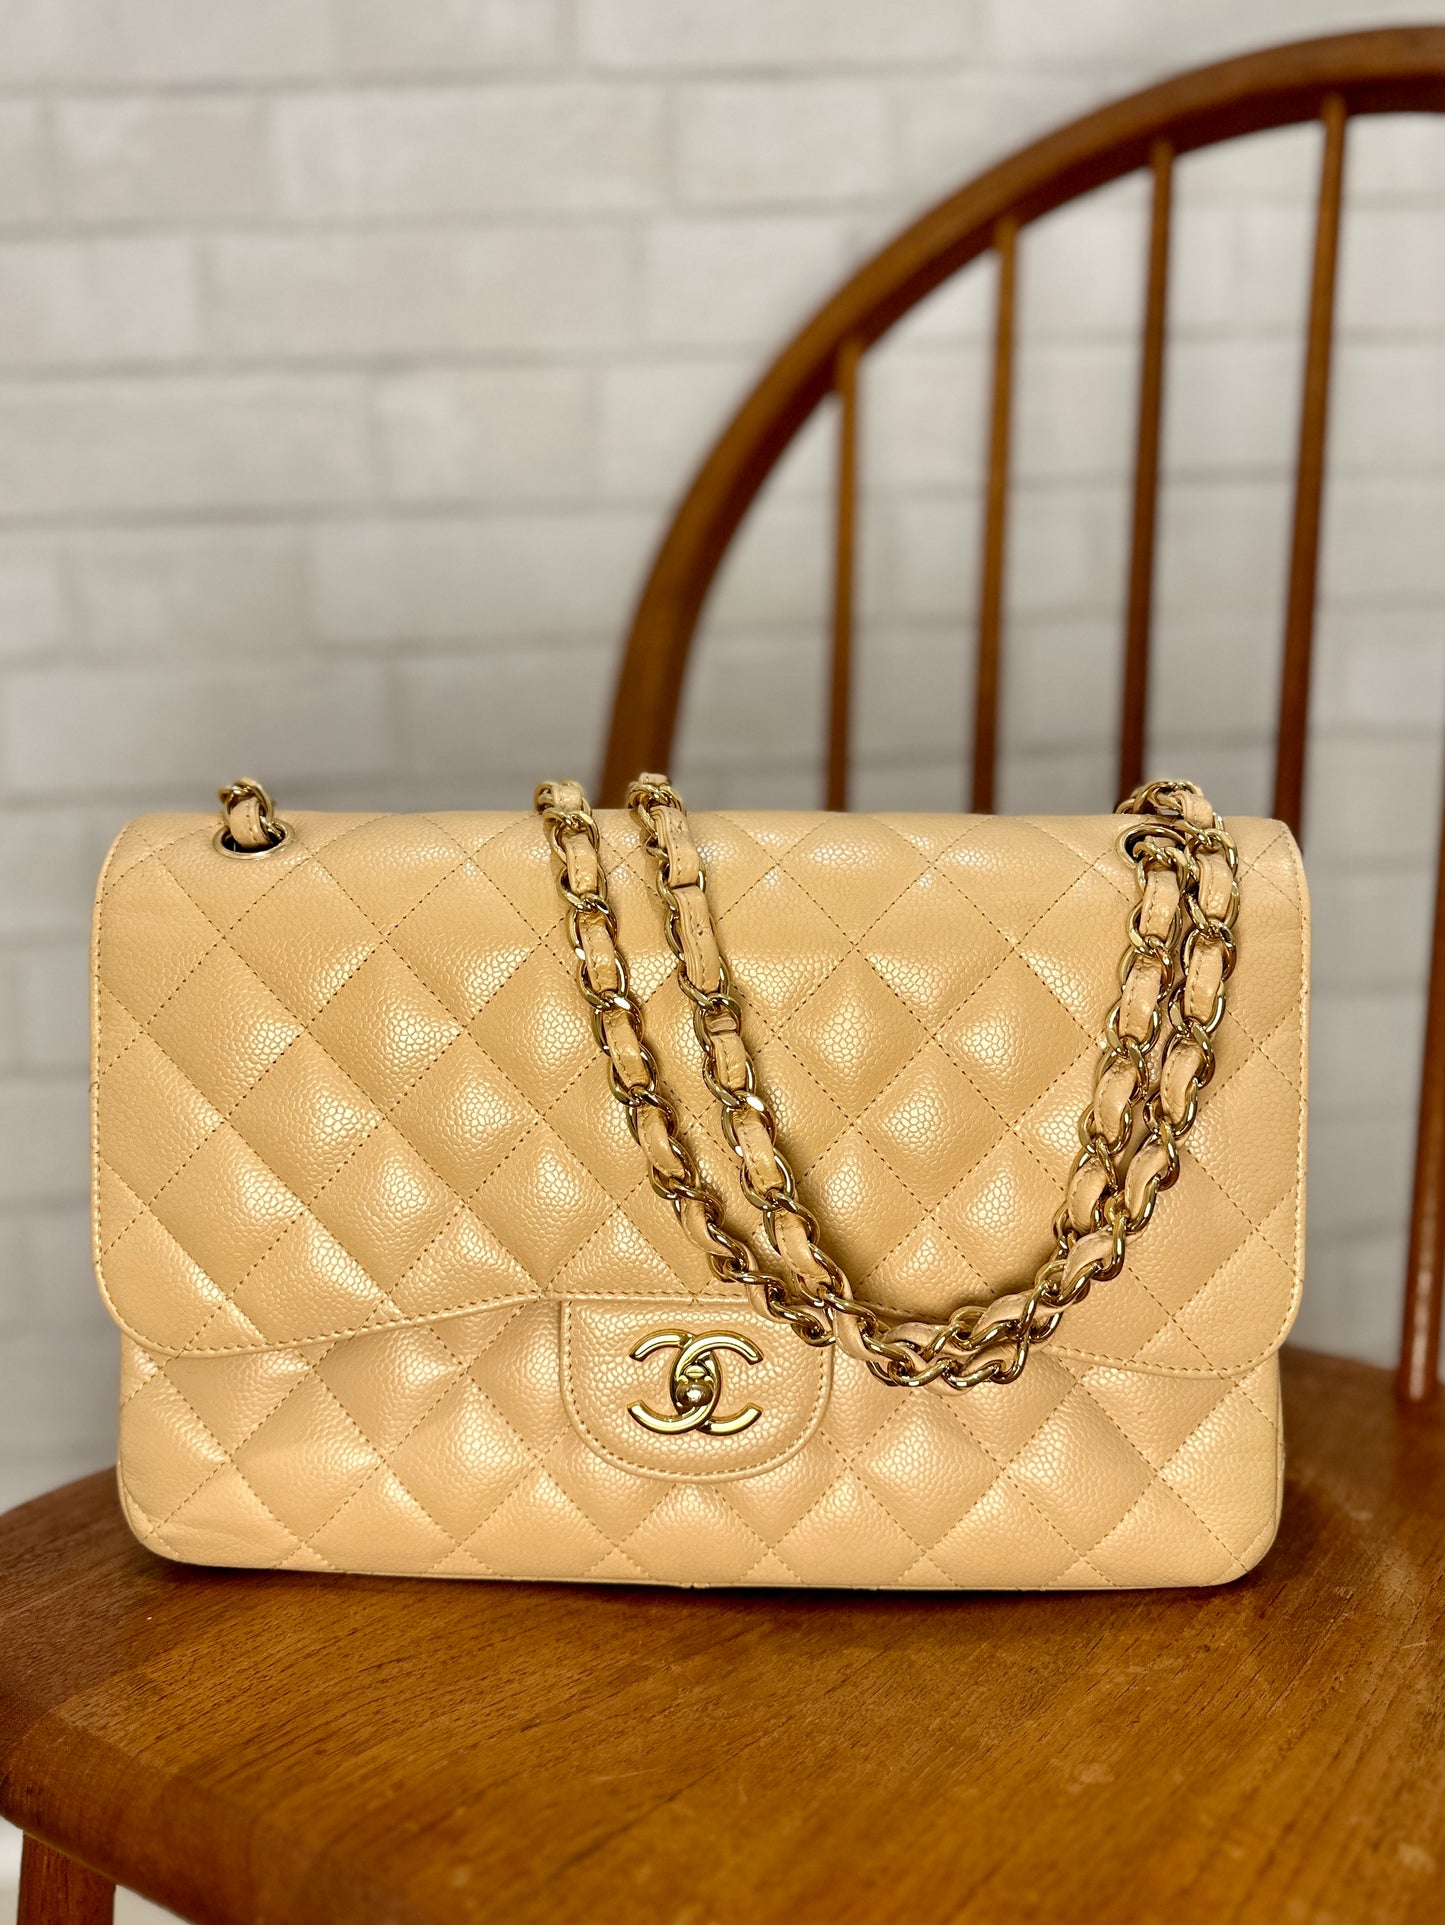 CHANEL Double Flap Caviar Leather Bag